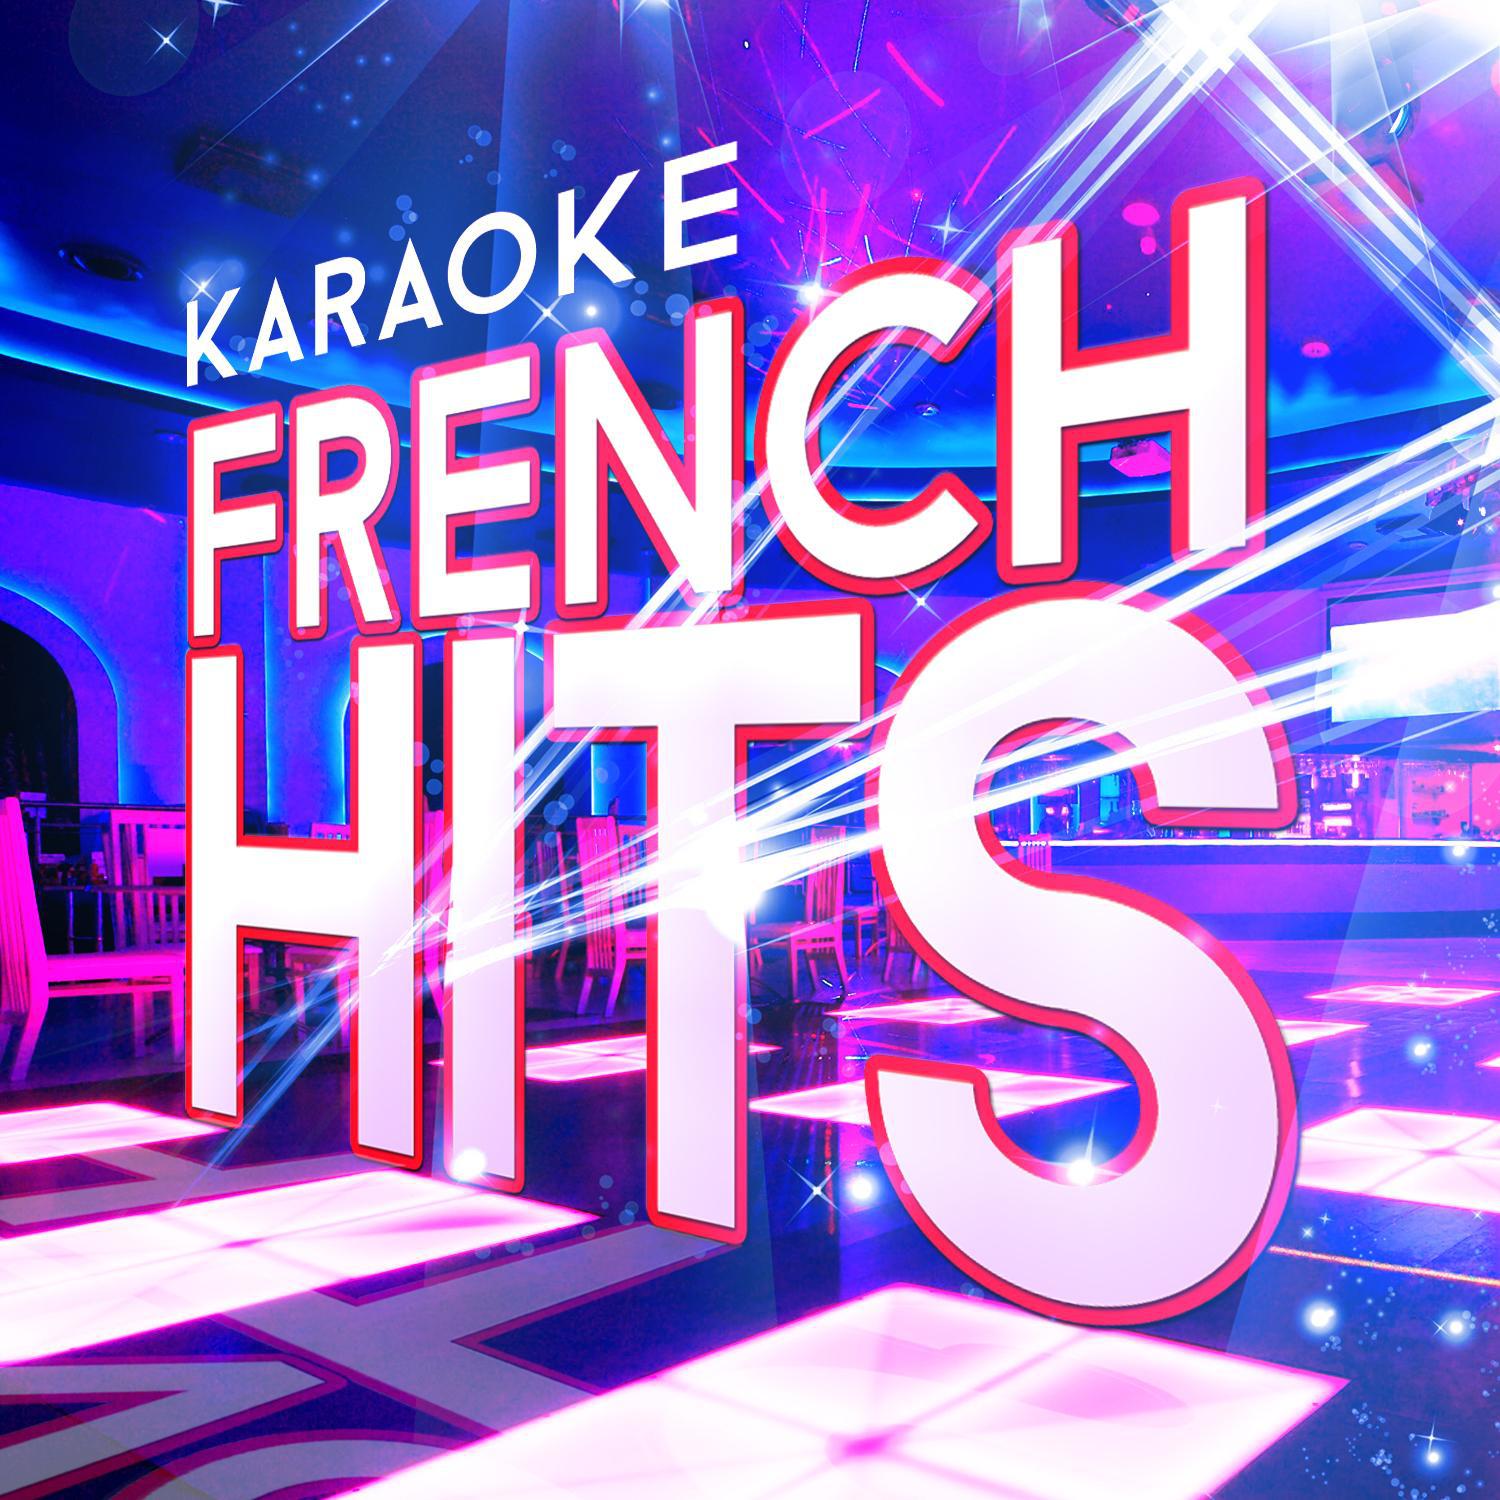 Les Hommes Qui Passent (In the Style of Patricia Kaas) [Karaoke Version]